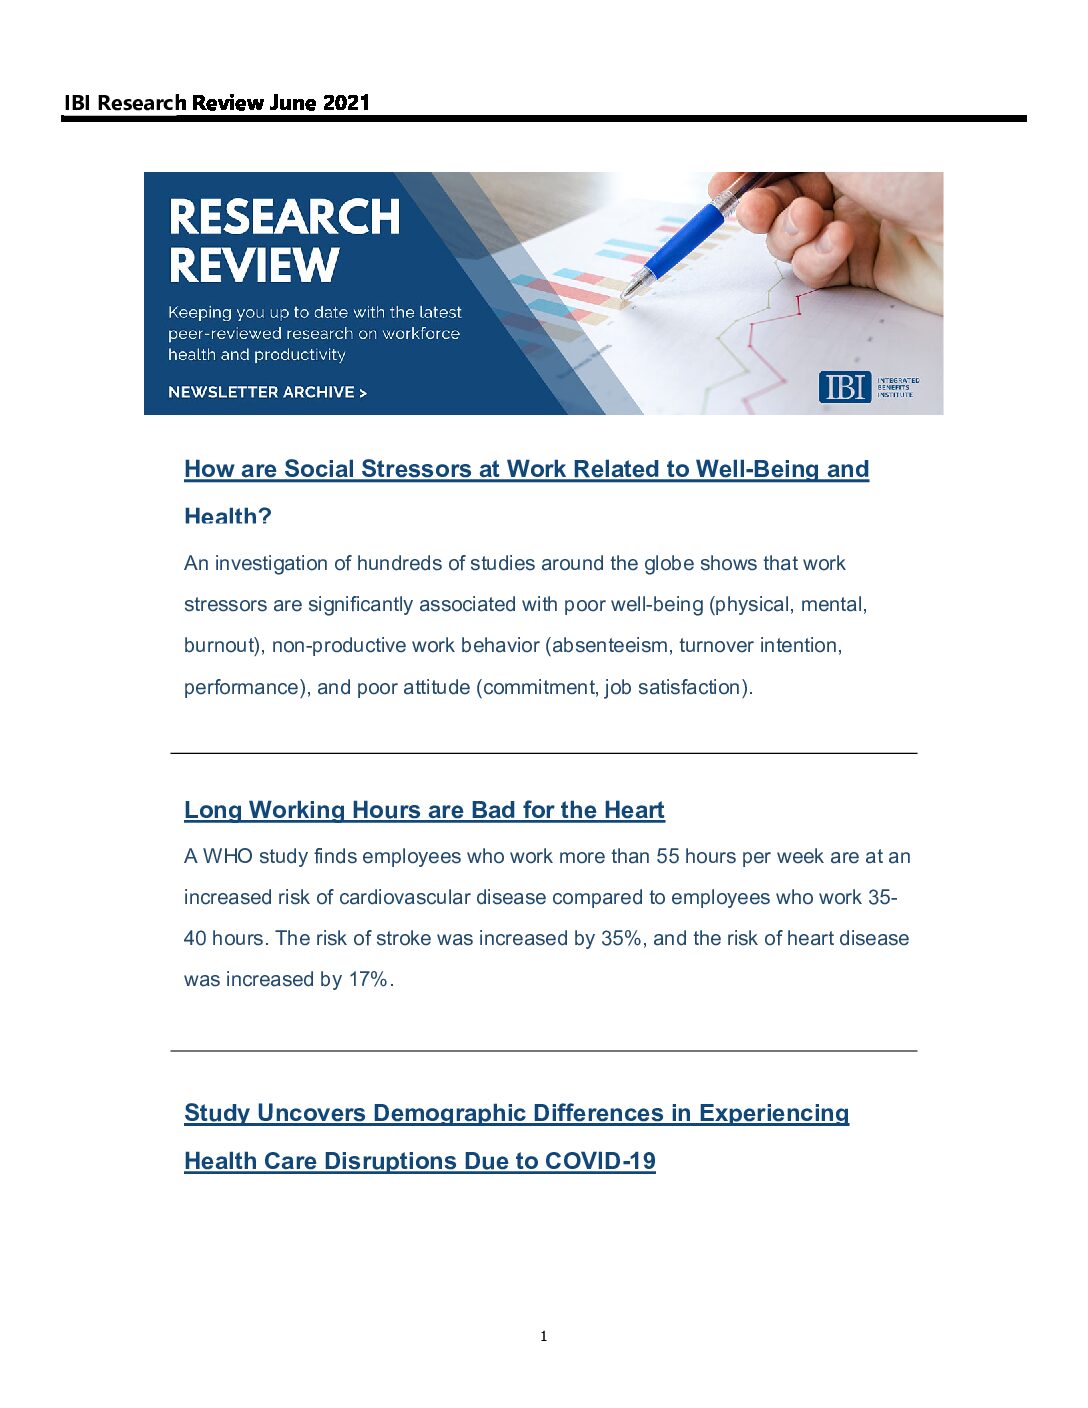 Research Review June 2021